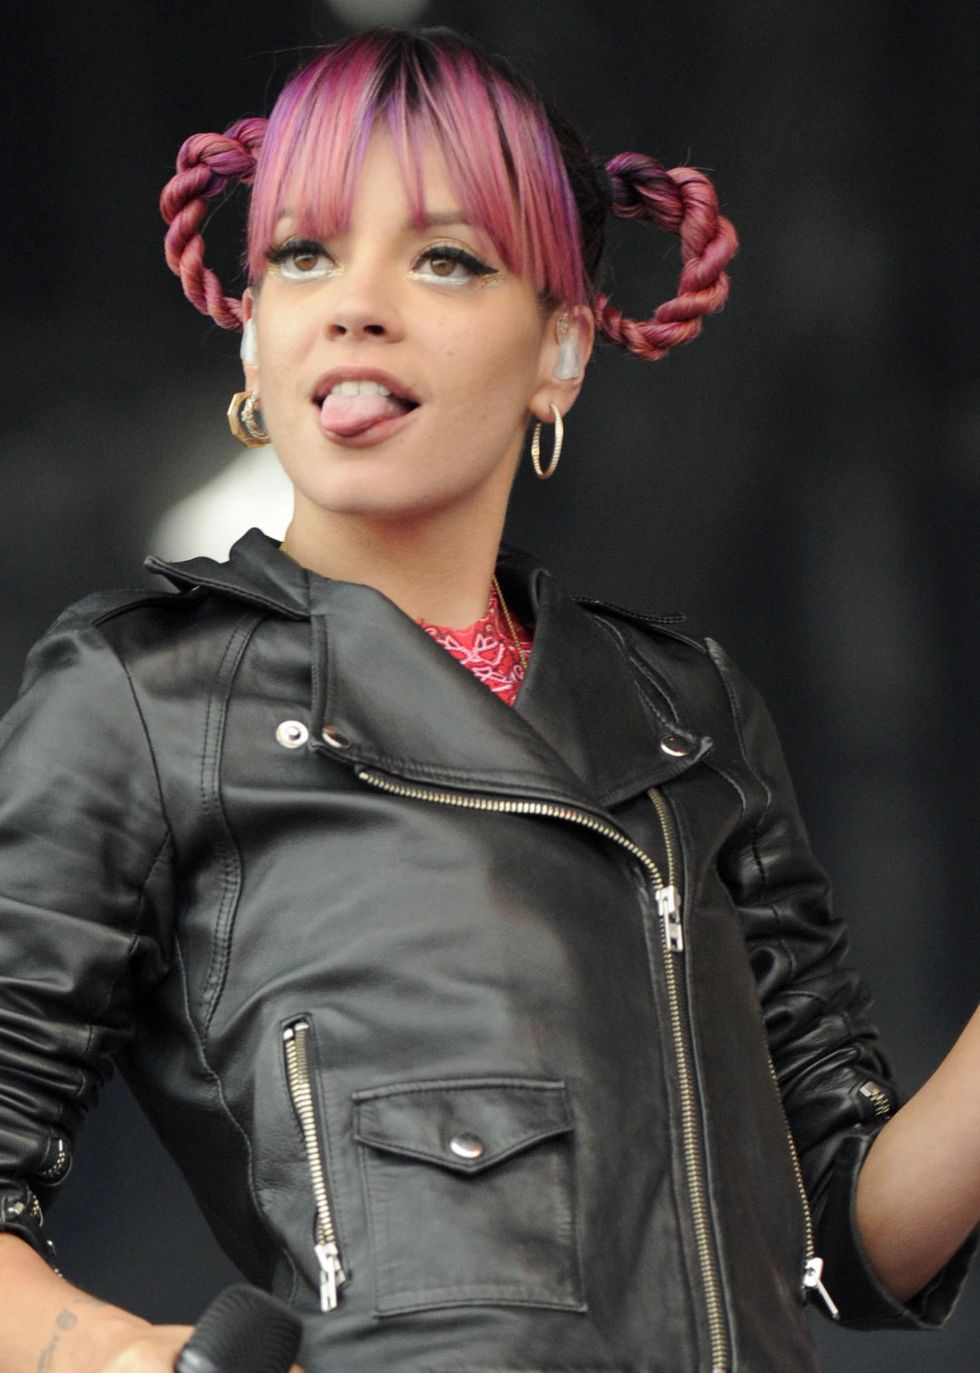 Lily Allen's hairstyle V Festival 2014